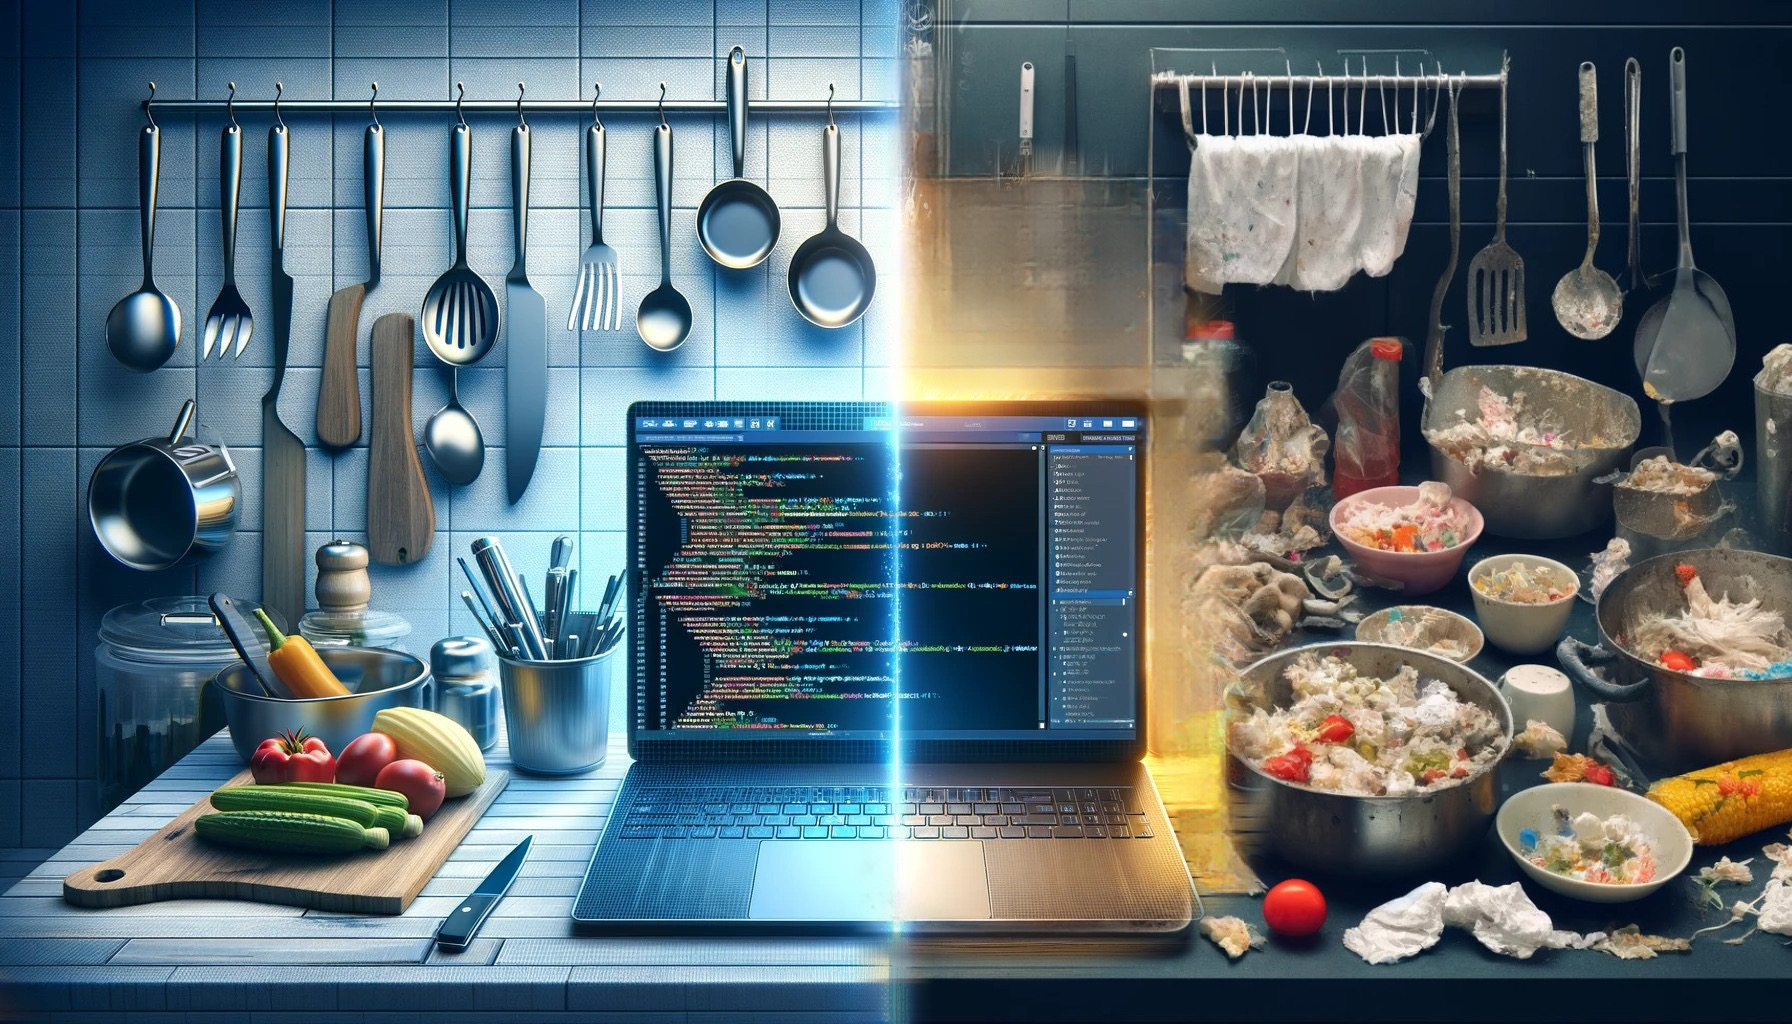 a split-screen image that visually connects the concept of cooking in a clean, organized kitchen with the practice of developing high-quality software. This visual metaphor highlights the importance of organization, clarity, and precision in both cooking and software development.